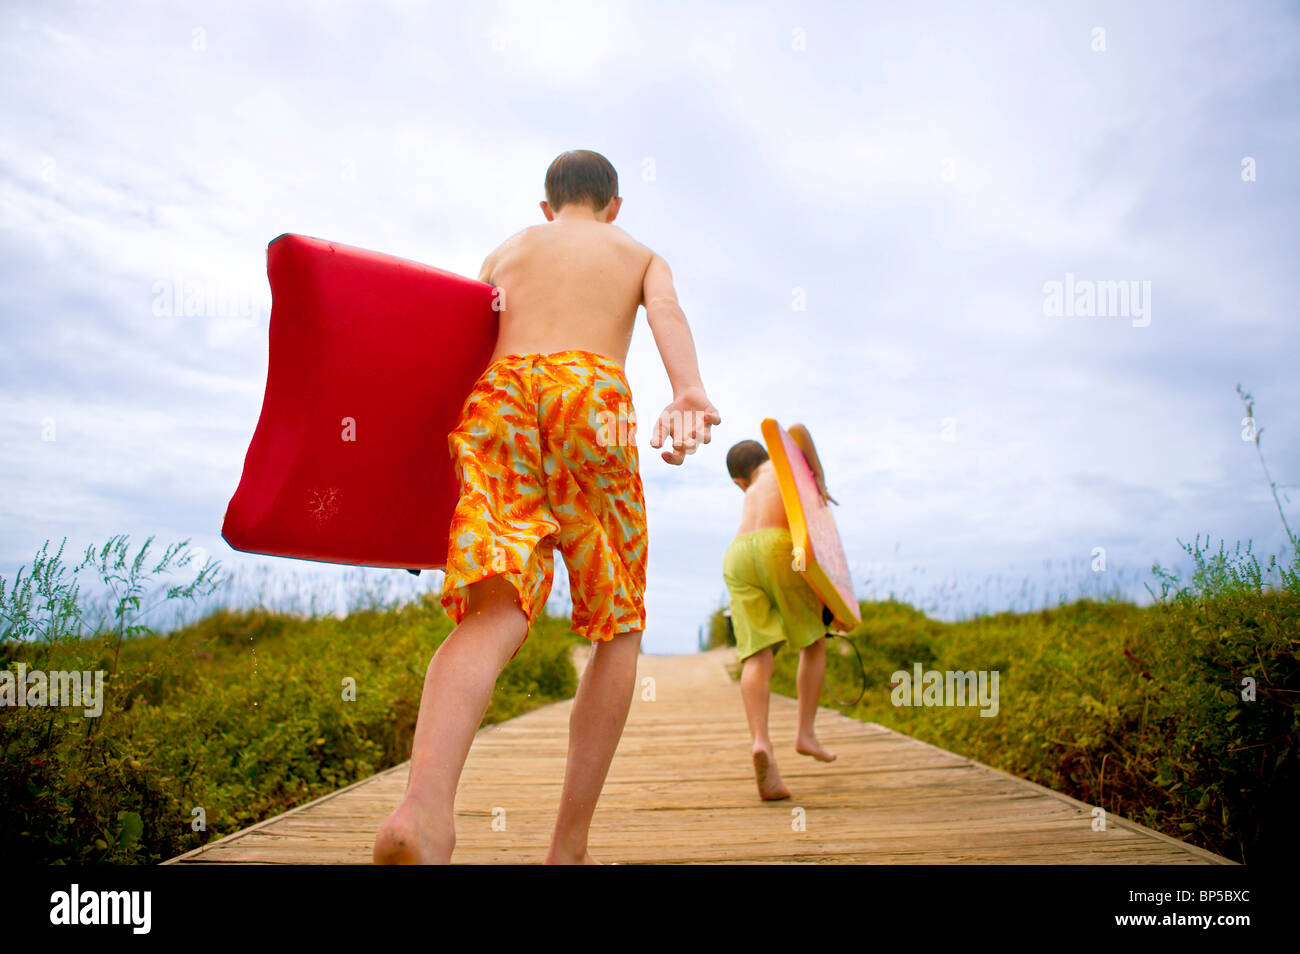 Two boys in swimming suits running on a beach boardwalk. Stock Photo